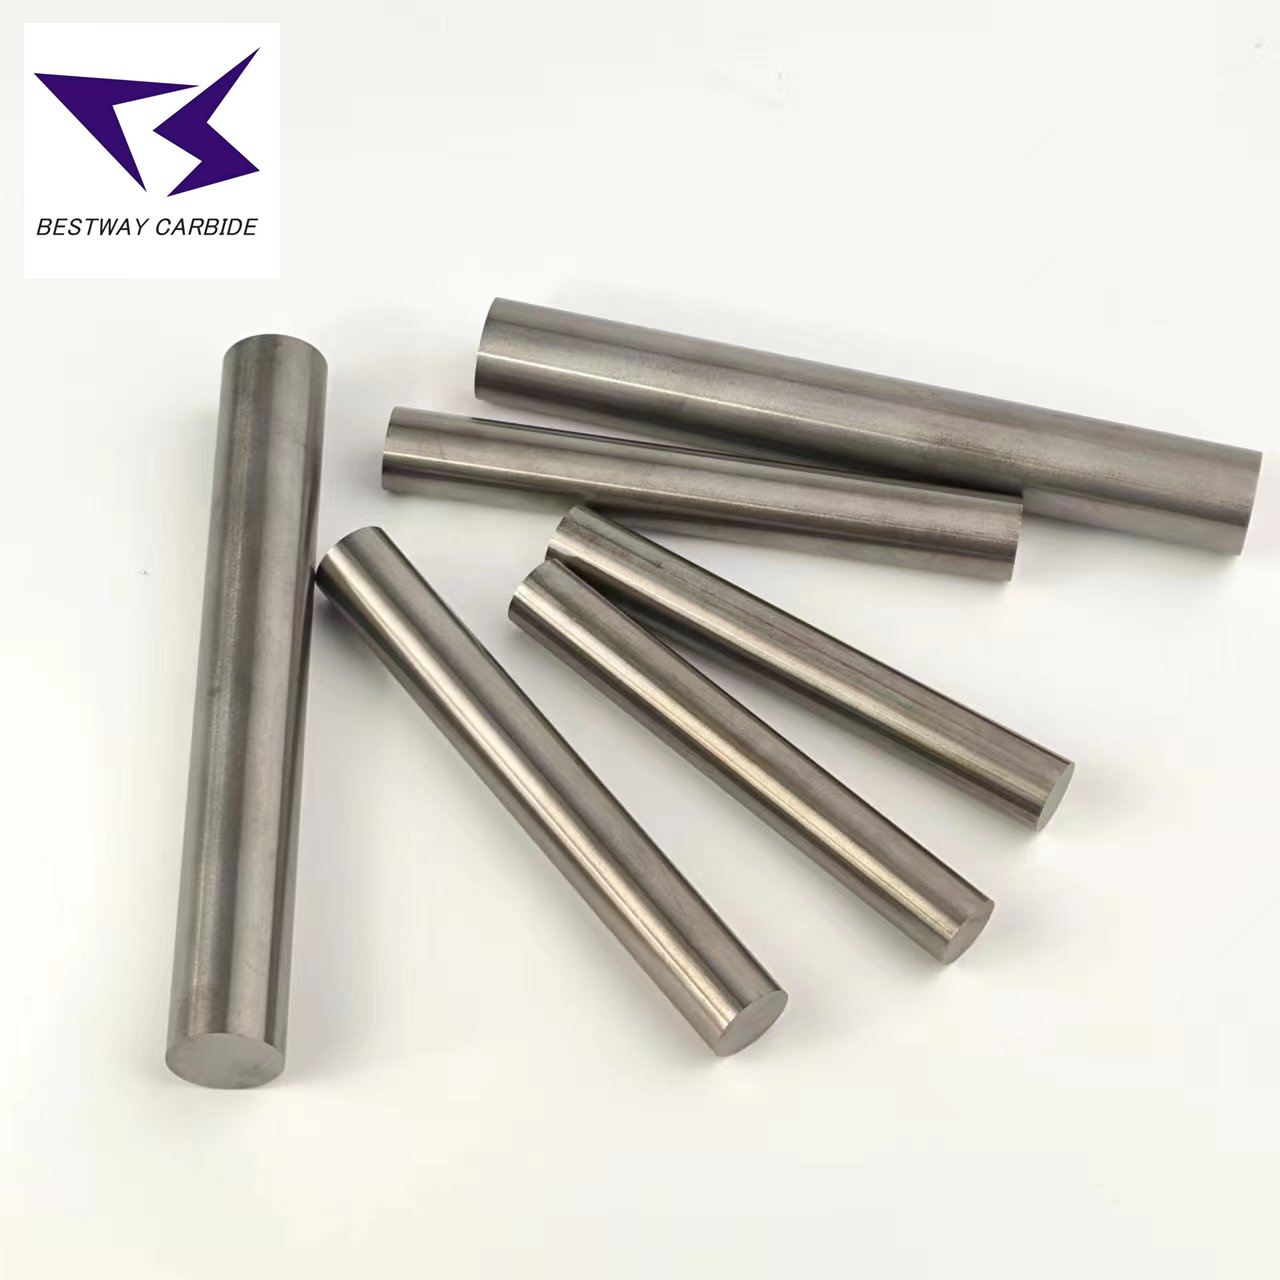 What are the functions of tungsten carbide round bars?